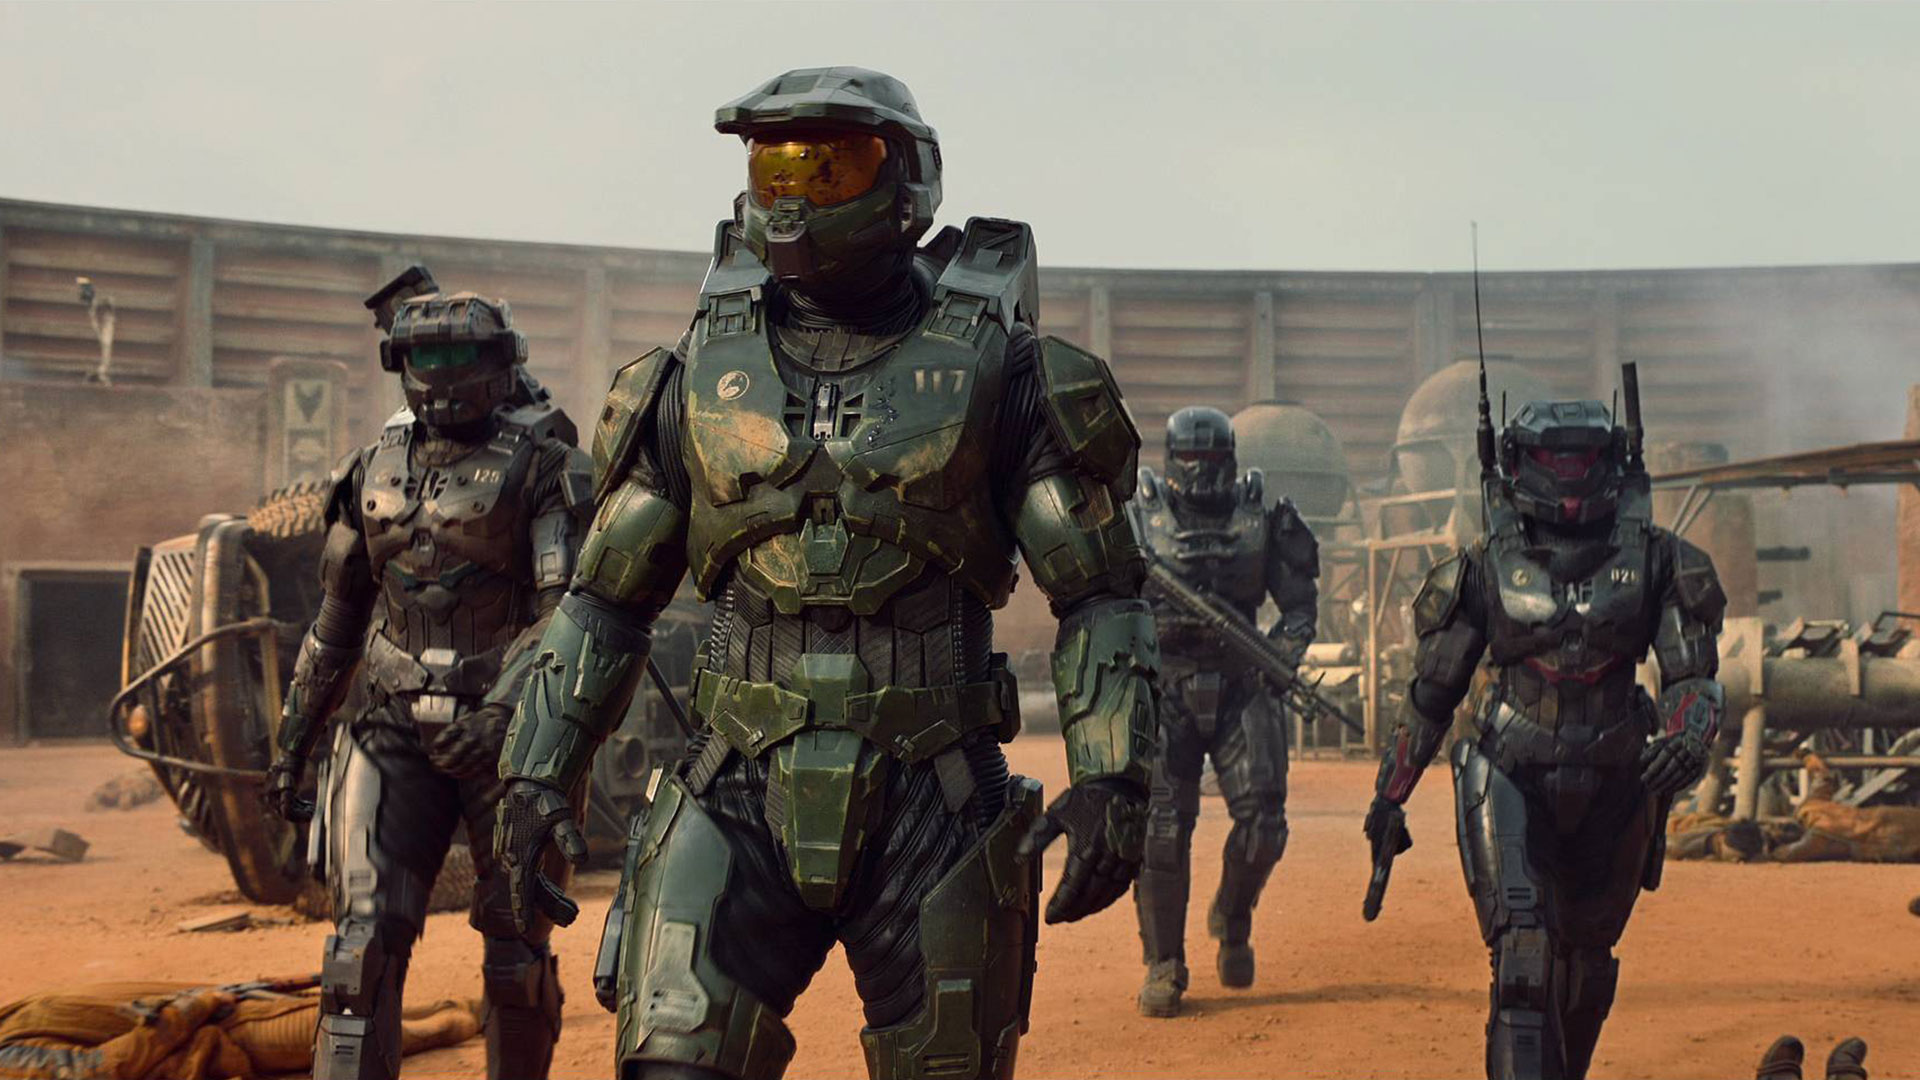 After the successful debut of Halo's first season on Paramount+, fans are eagerly awaiting the next chapter in the Master Chief's story